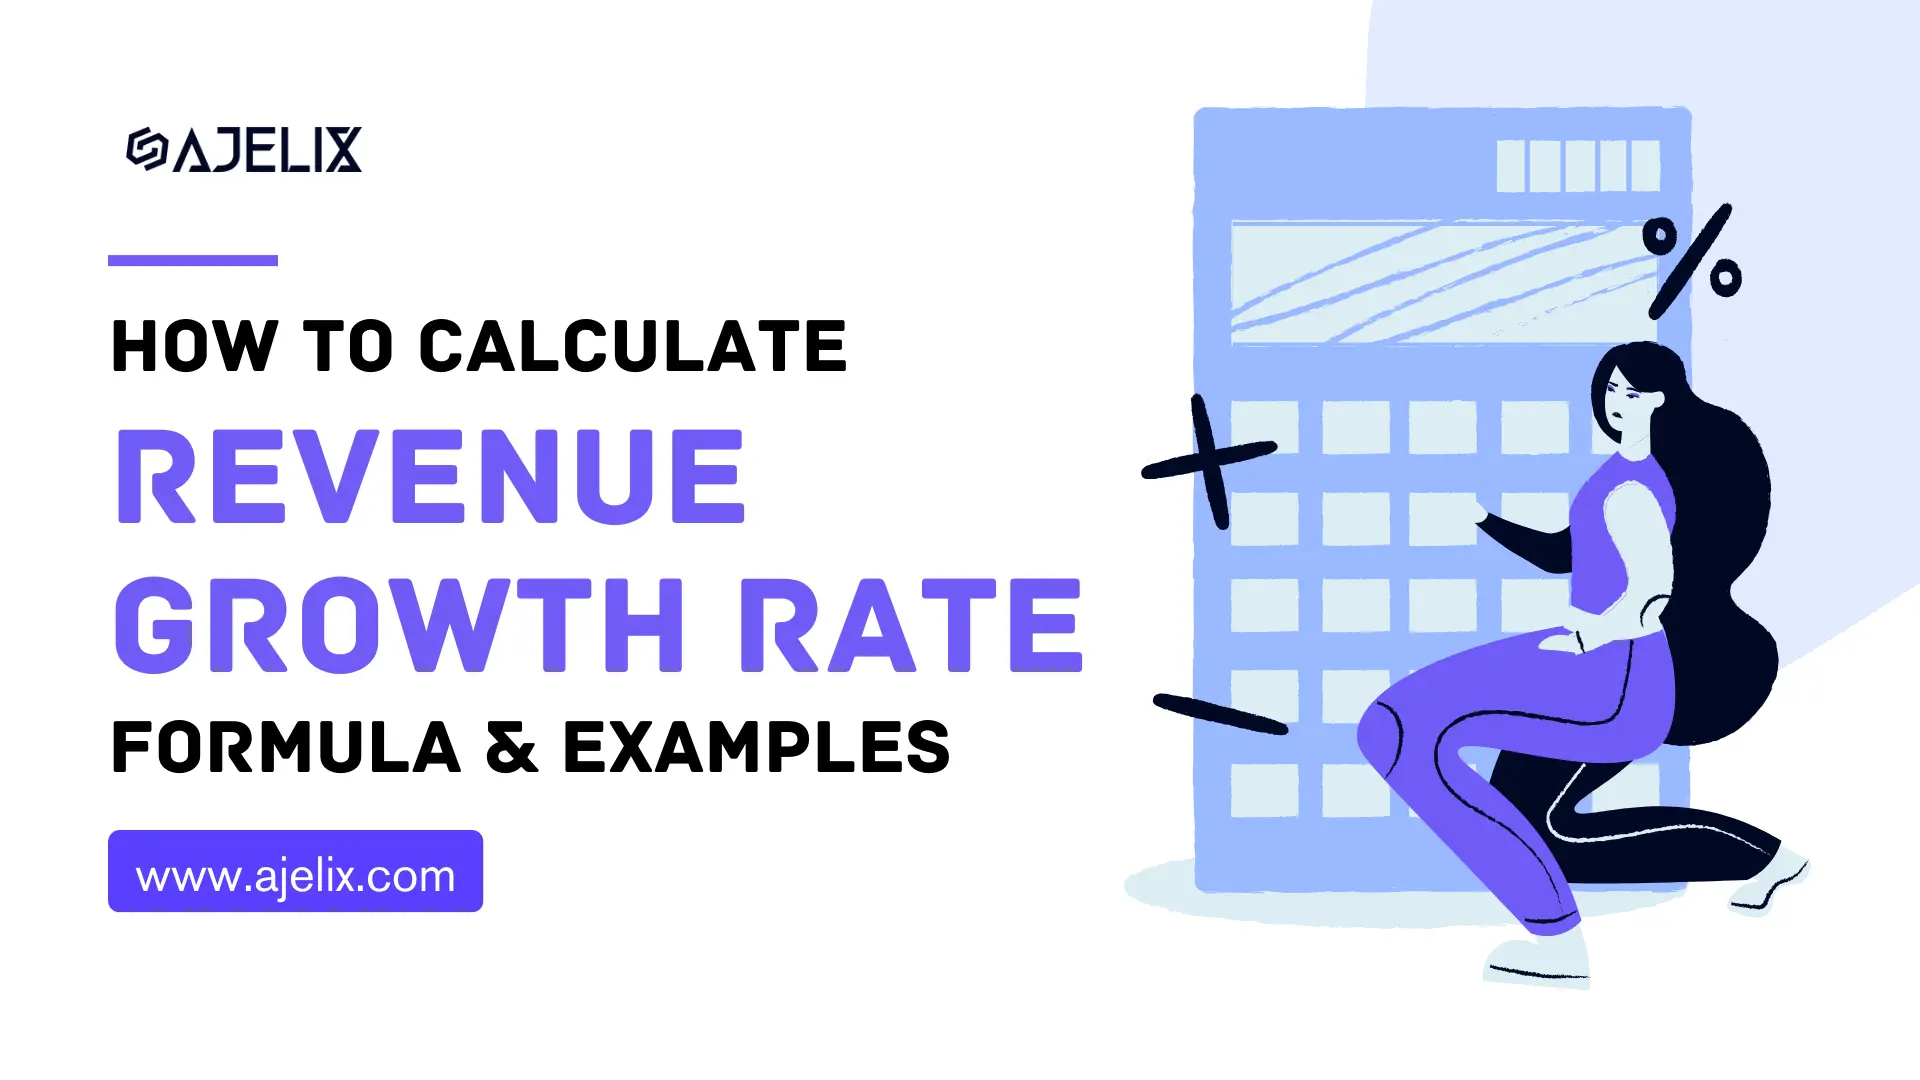 How To Calculate Revenue Growth Rate: Formula & Examples